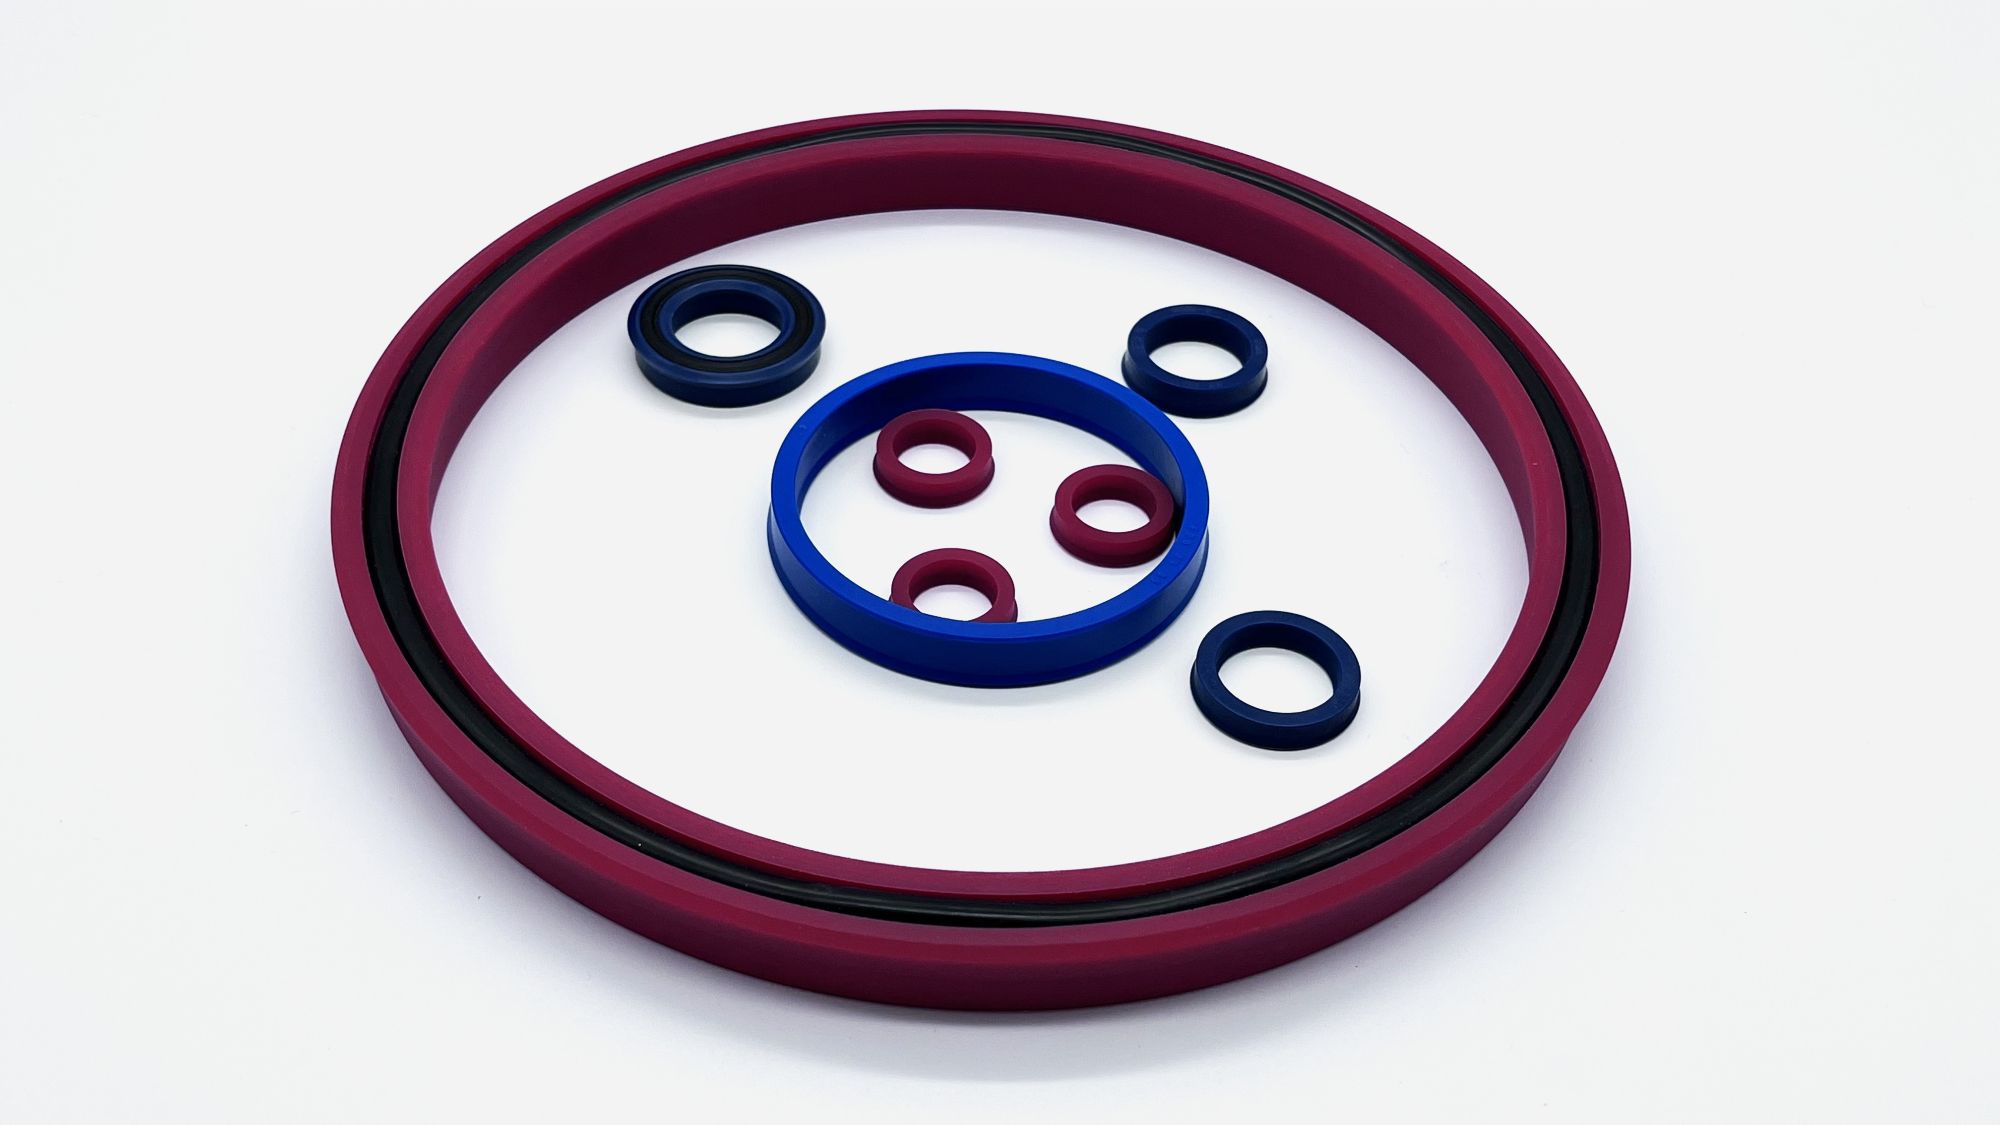 Hydraulic piston seals in various colors - Chromex